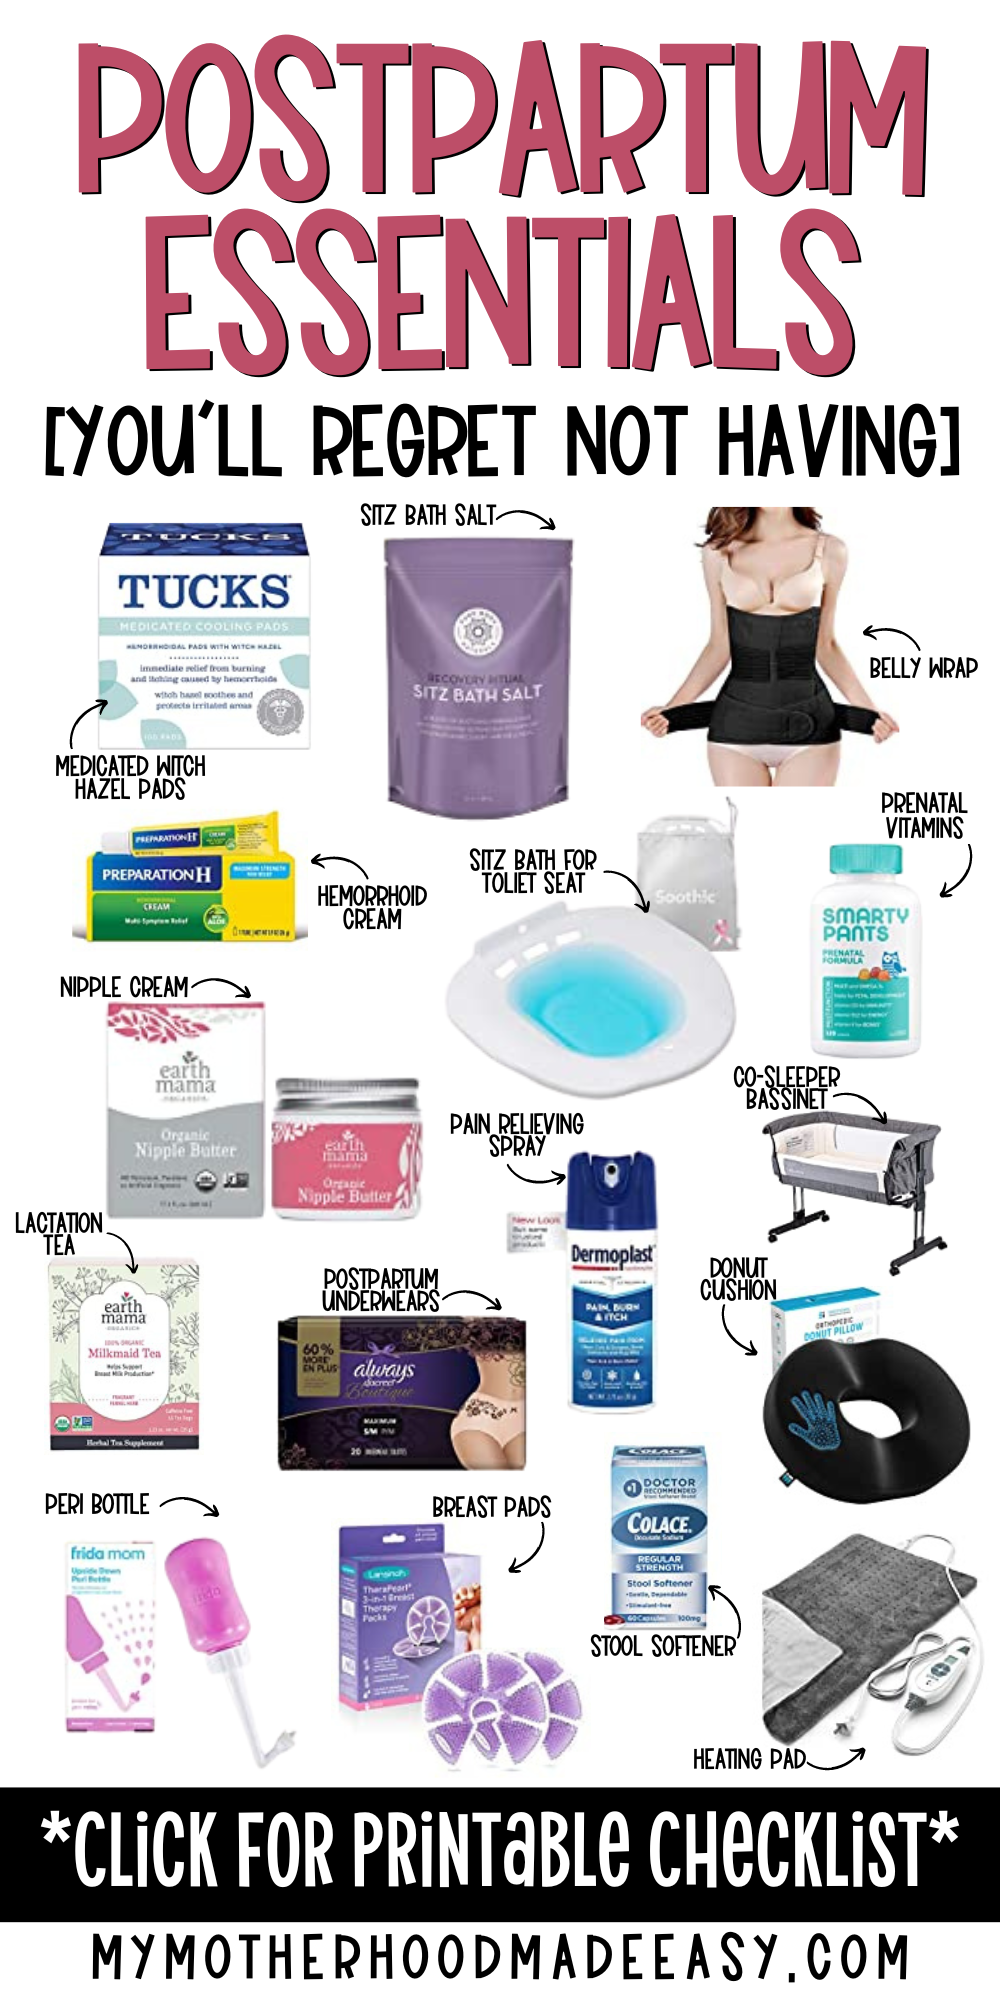 Ten Postpartum Essentials And Tips For New Mothers